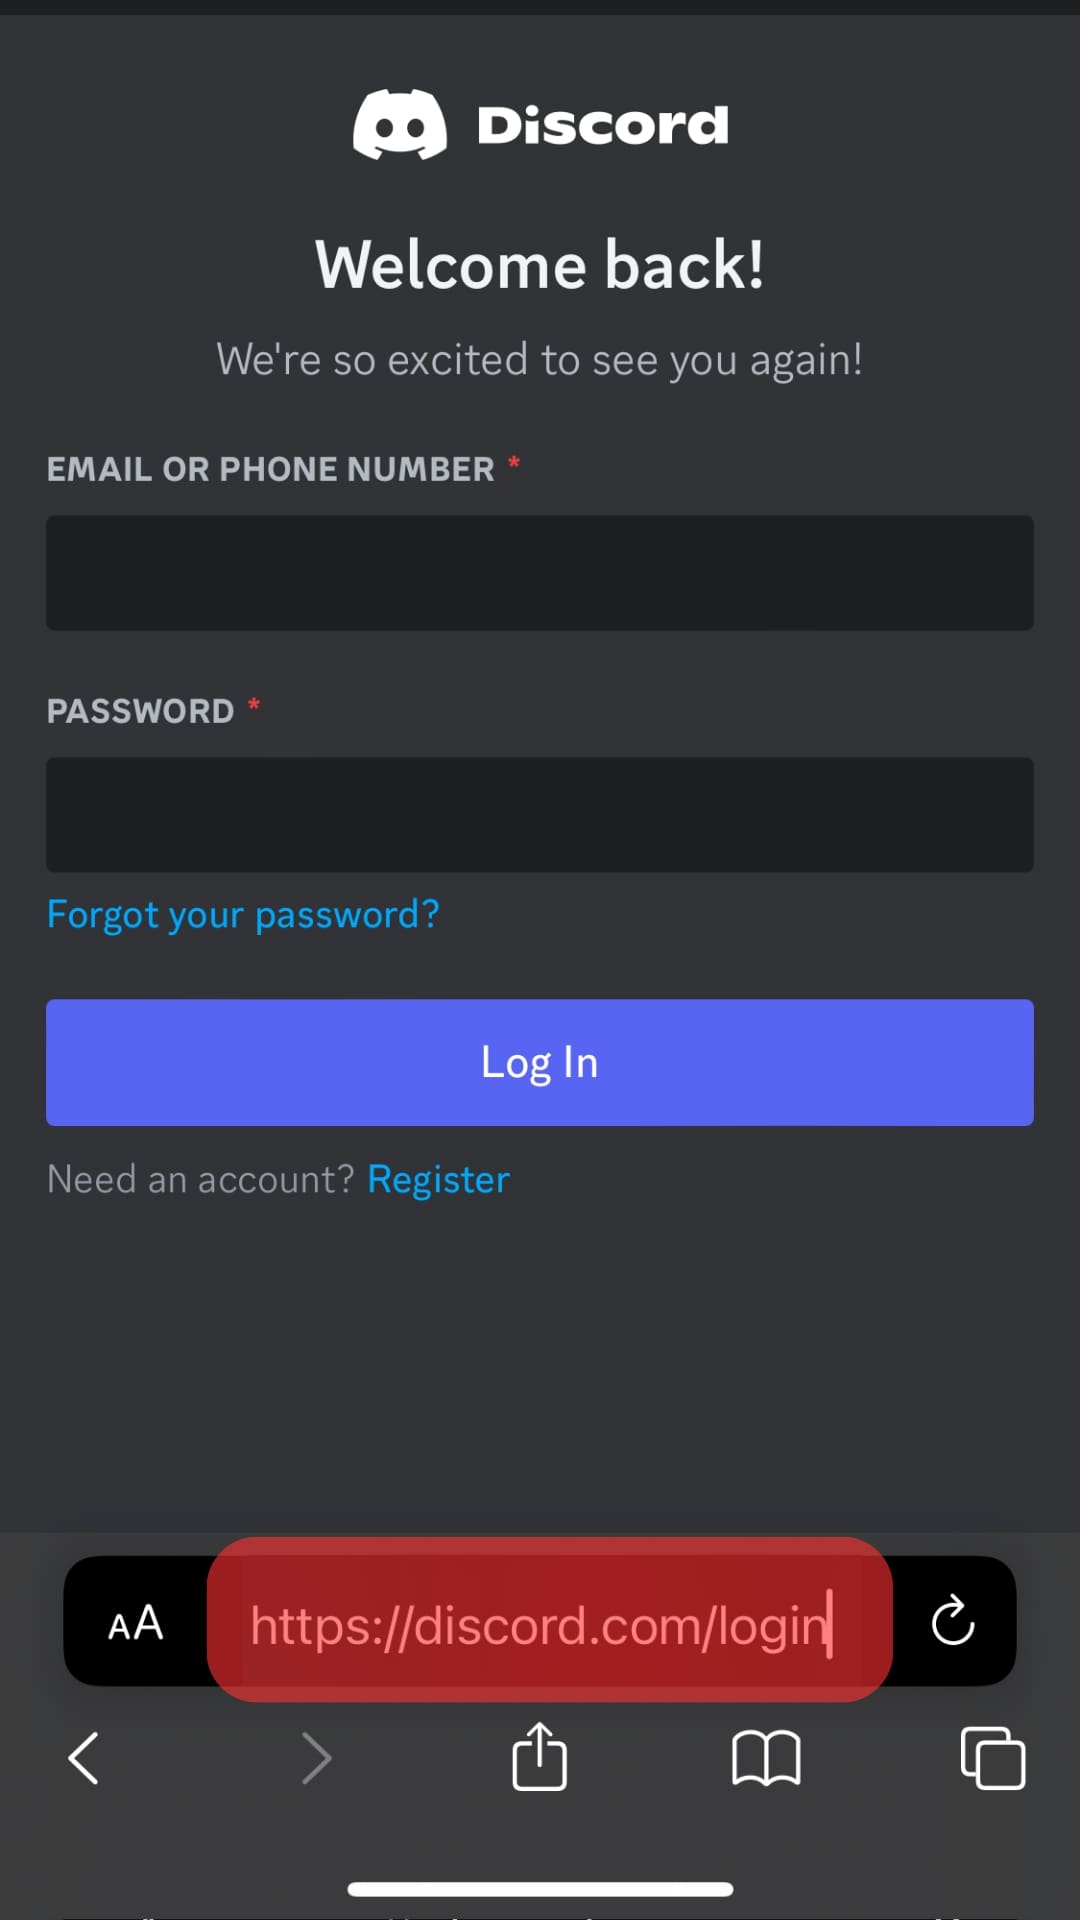 Navigate To The Discord Login Page.